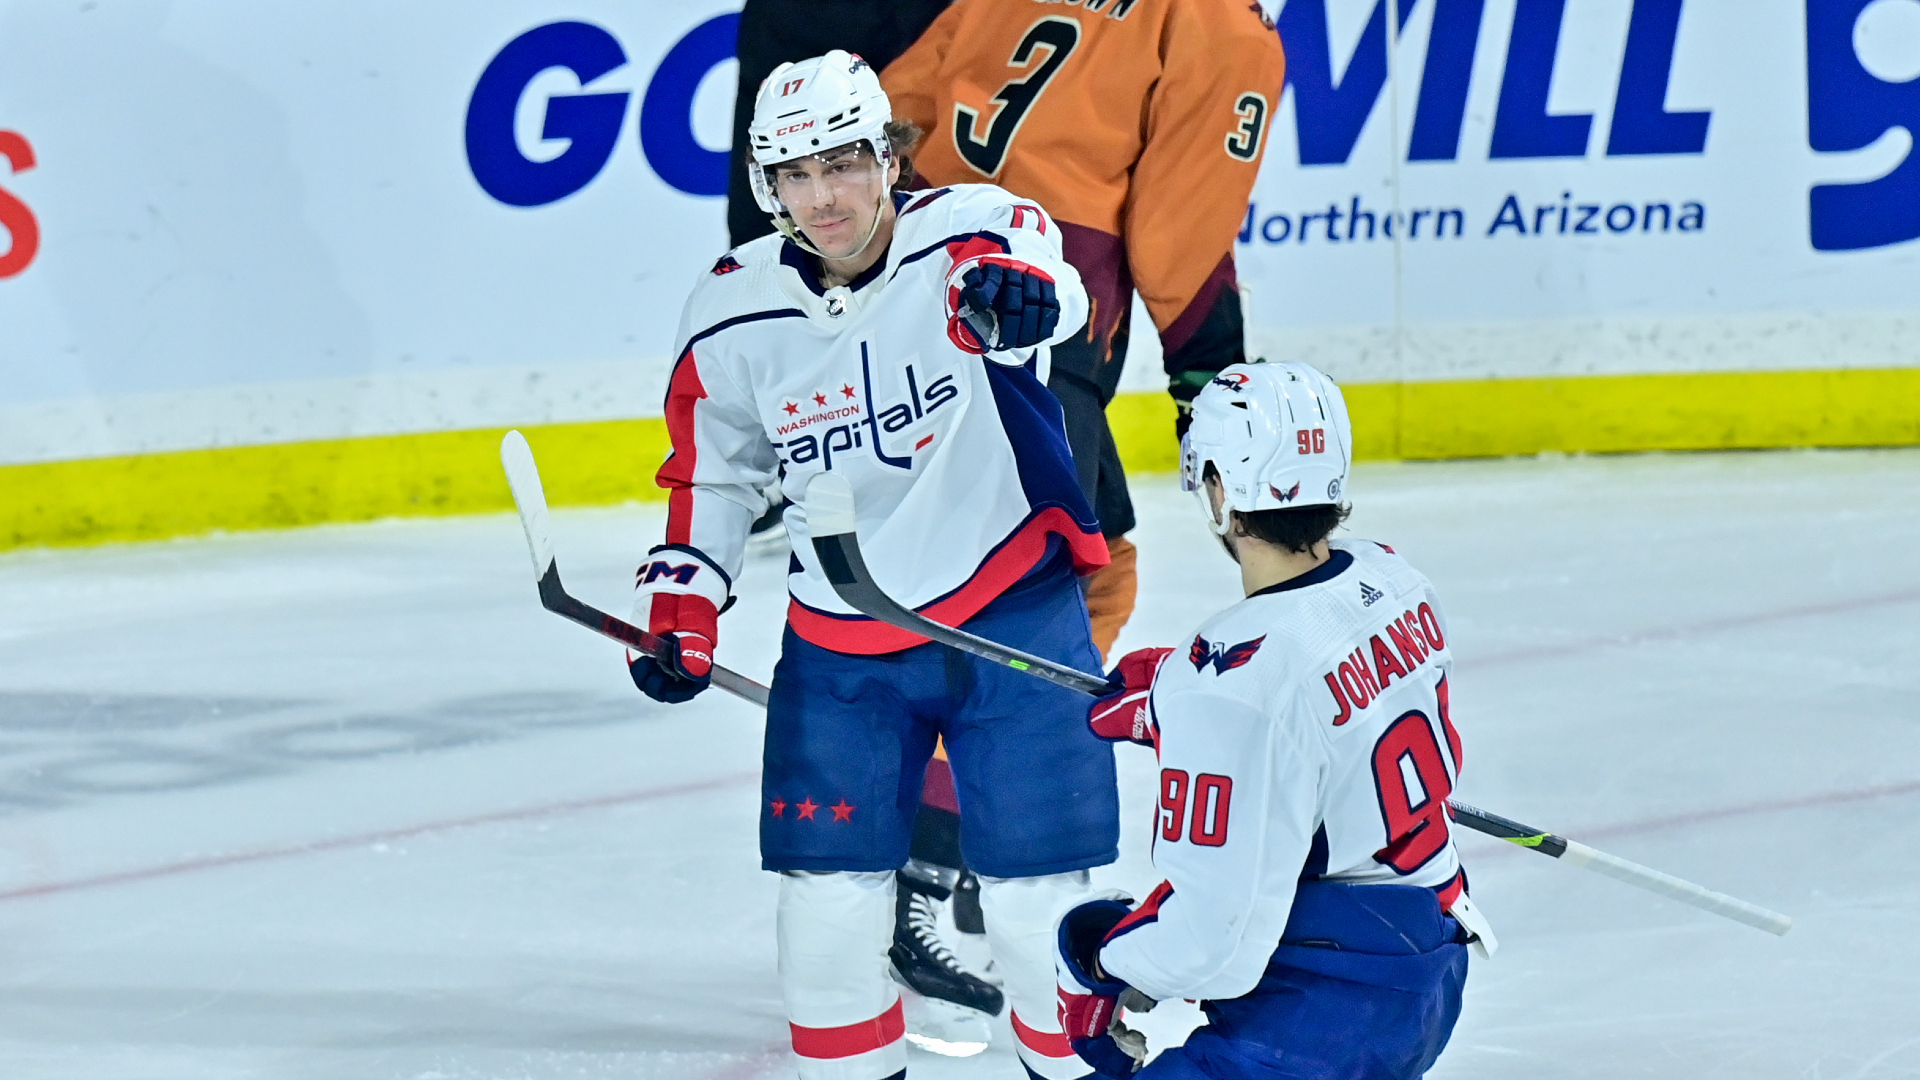 Capitals center Dylan Strome celebrates with left wing Marcus Johansson after scoring a goal against the Coyotes